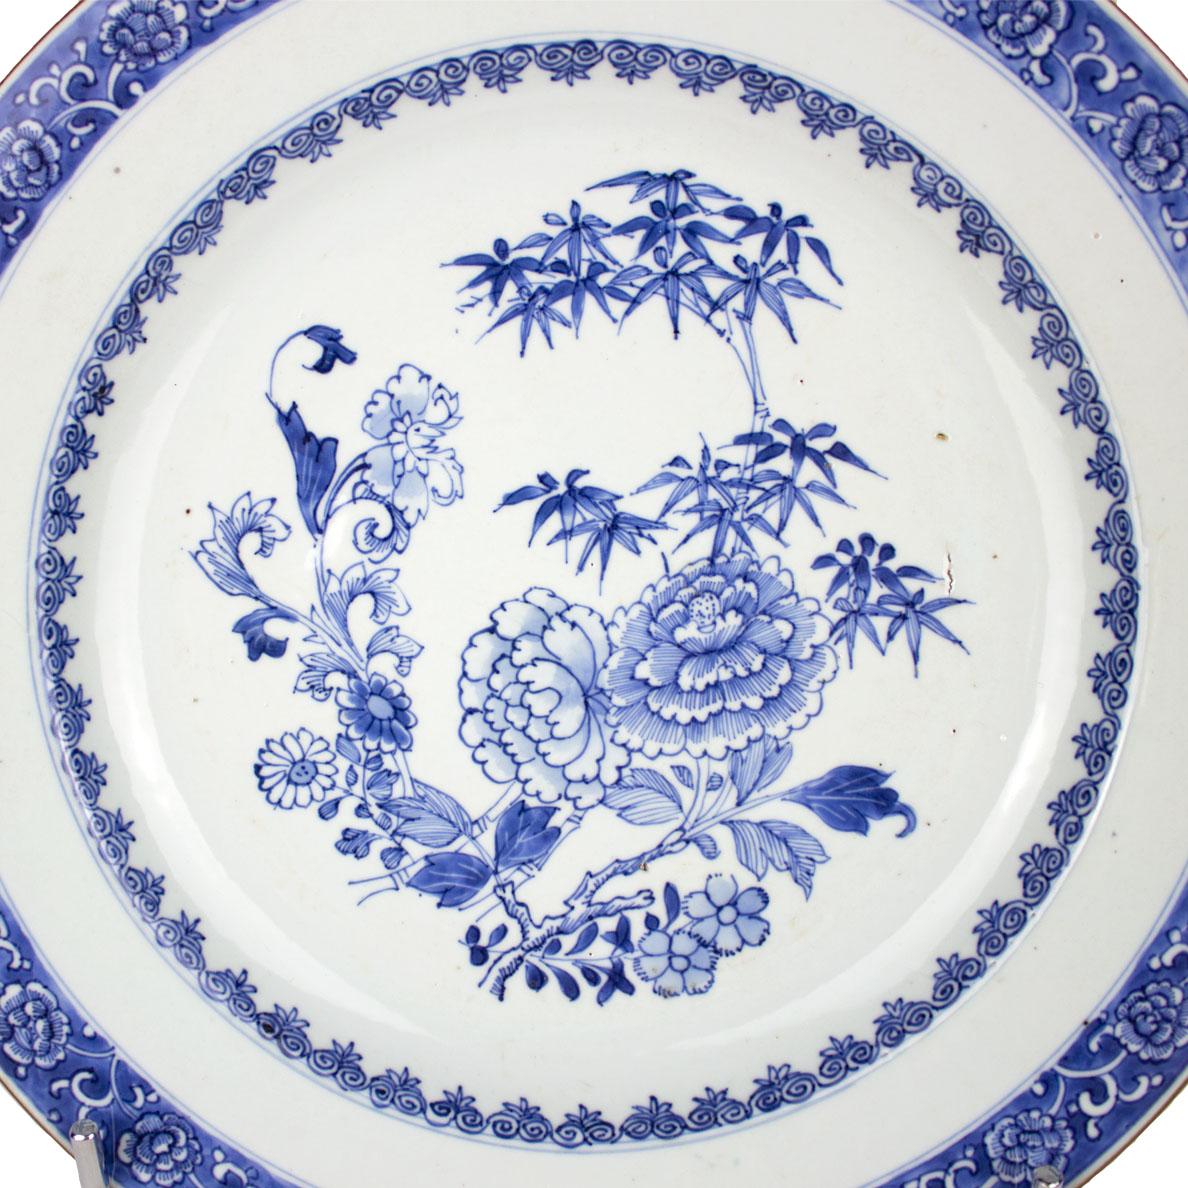 A Chinese porcelain plate, Qing Dynasty (1644-1912), Qianlong Period (1736-1795), East India Company. Underglaze blue decoration depicting in the centre a garden with several type of flowers and ruyi scrolls on the inside frieze. The rim presents